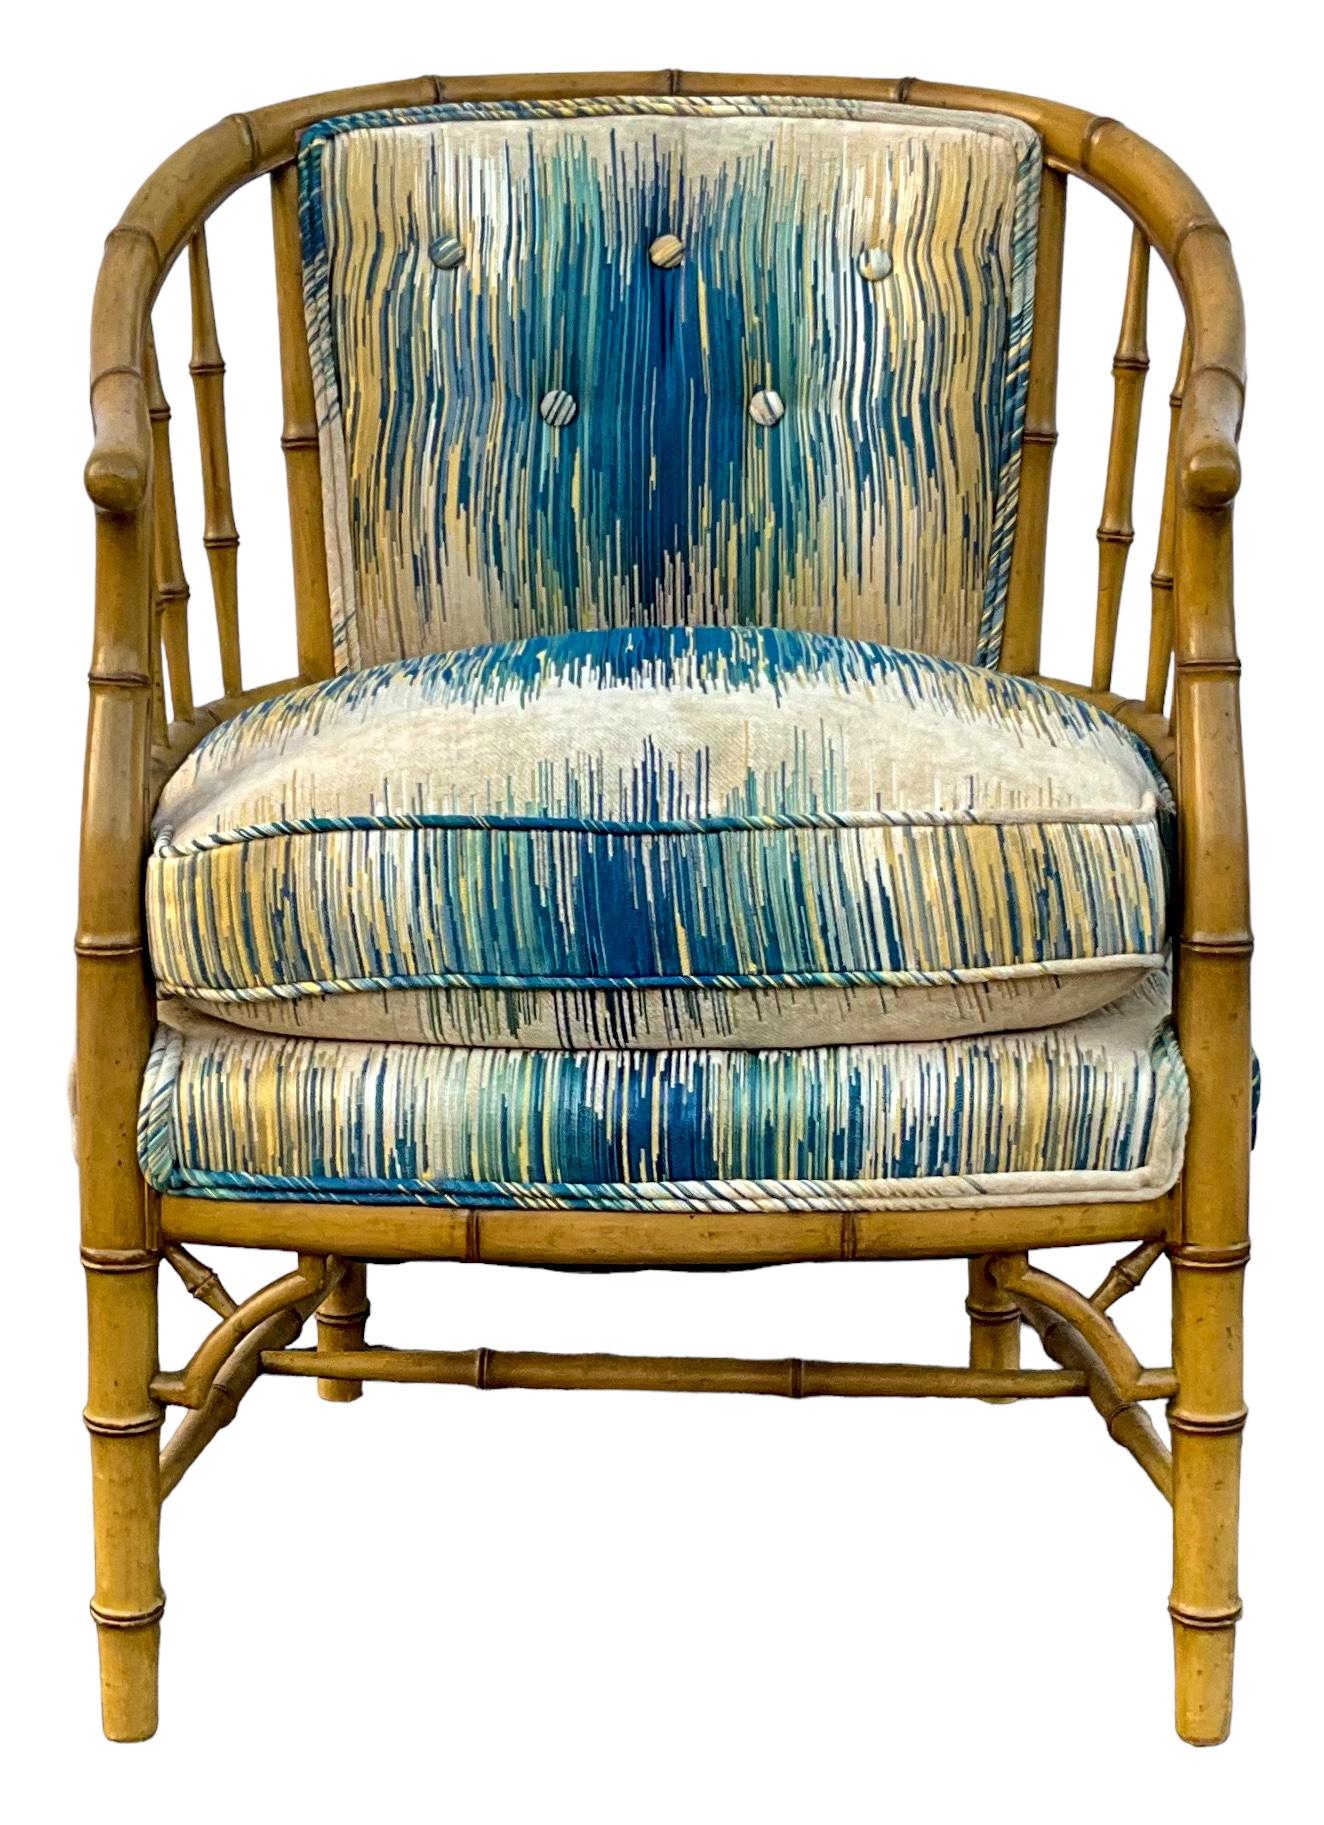 Mid-Century Regency Style Carved & Painted Faux Bamboo Barrel Club Chairs -Pair In Good Condition For Sale In Kennesaw, GA